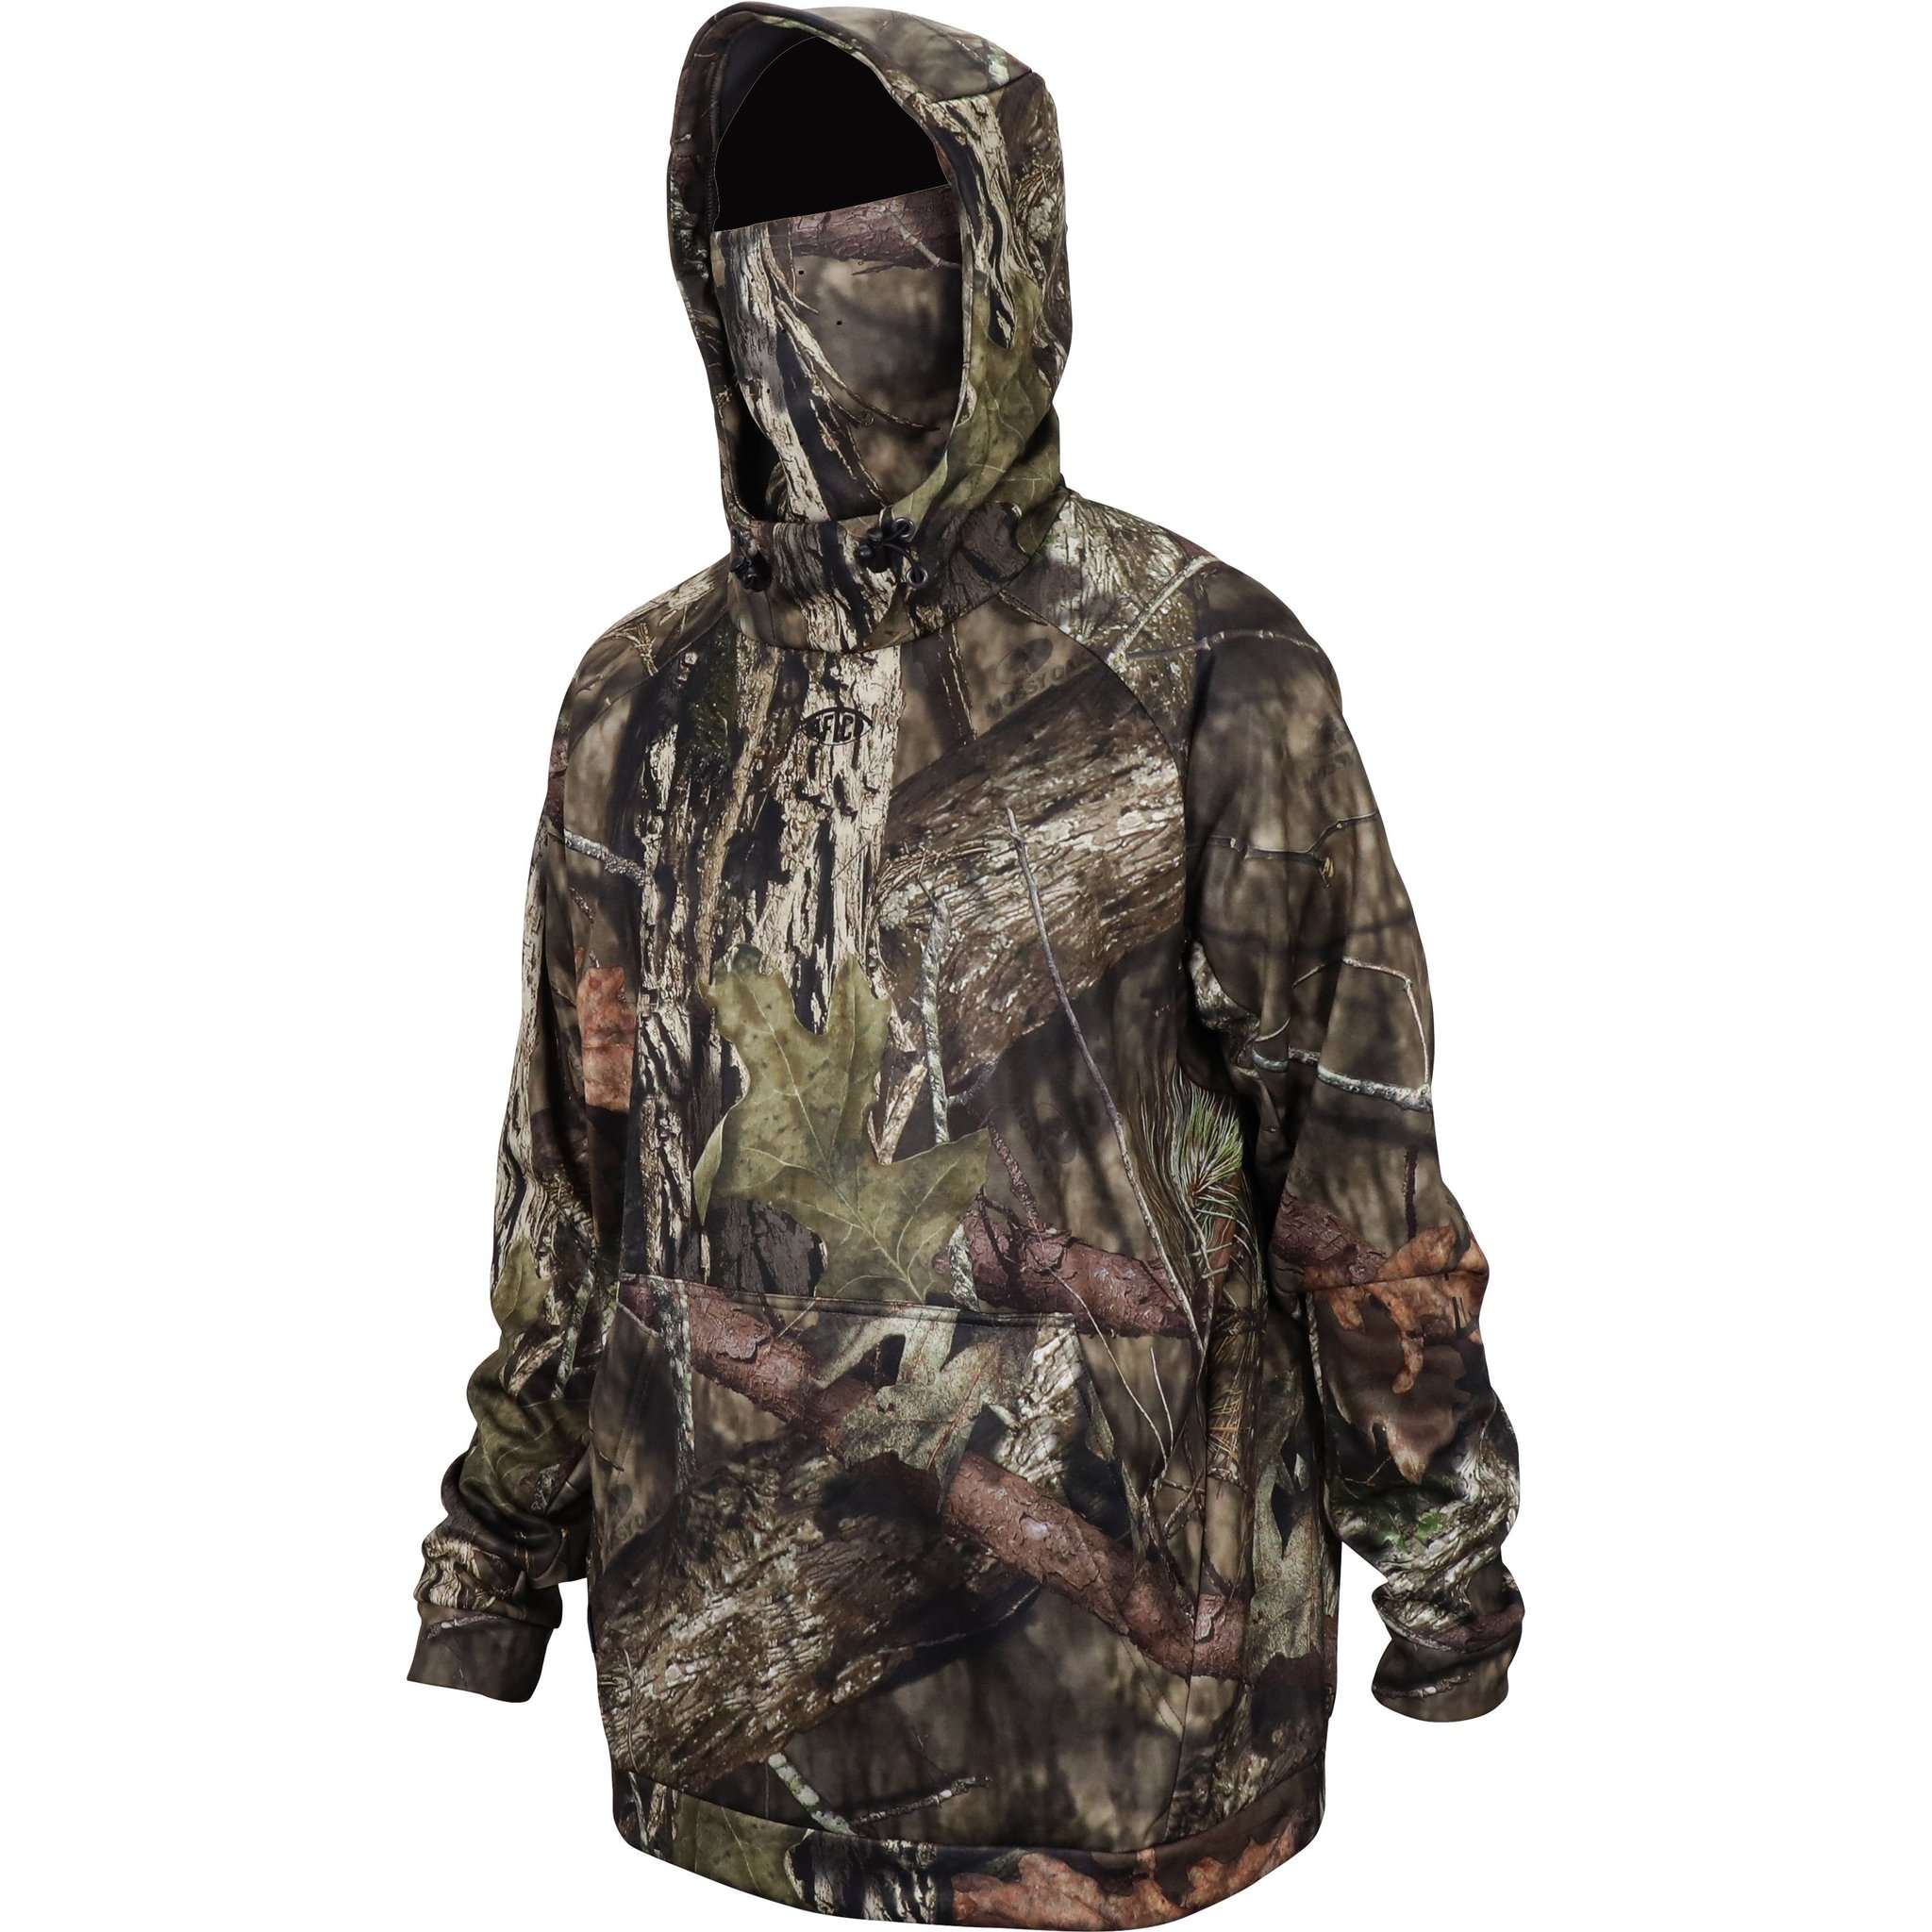 <p><strong>Aftco Reaper Mossy Oak Camo Tech Sweatshirt</strong><br> Whether you're headed to the tree stand or hitting the lake, the Aftco Reaper Mossy Oak Camo Tech Sweatshirt is for you. Since releasing the Reaper Sweatshirt, a great number of Elite Series pros have sported it on a regular basis, but now it's offered in Mossy Oak Bottomland and Break Up Country for dual-purpose use. <a href=